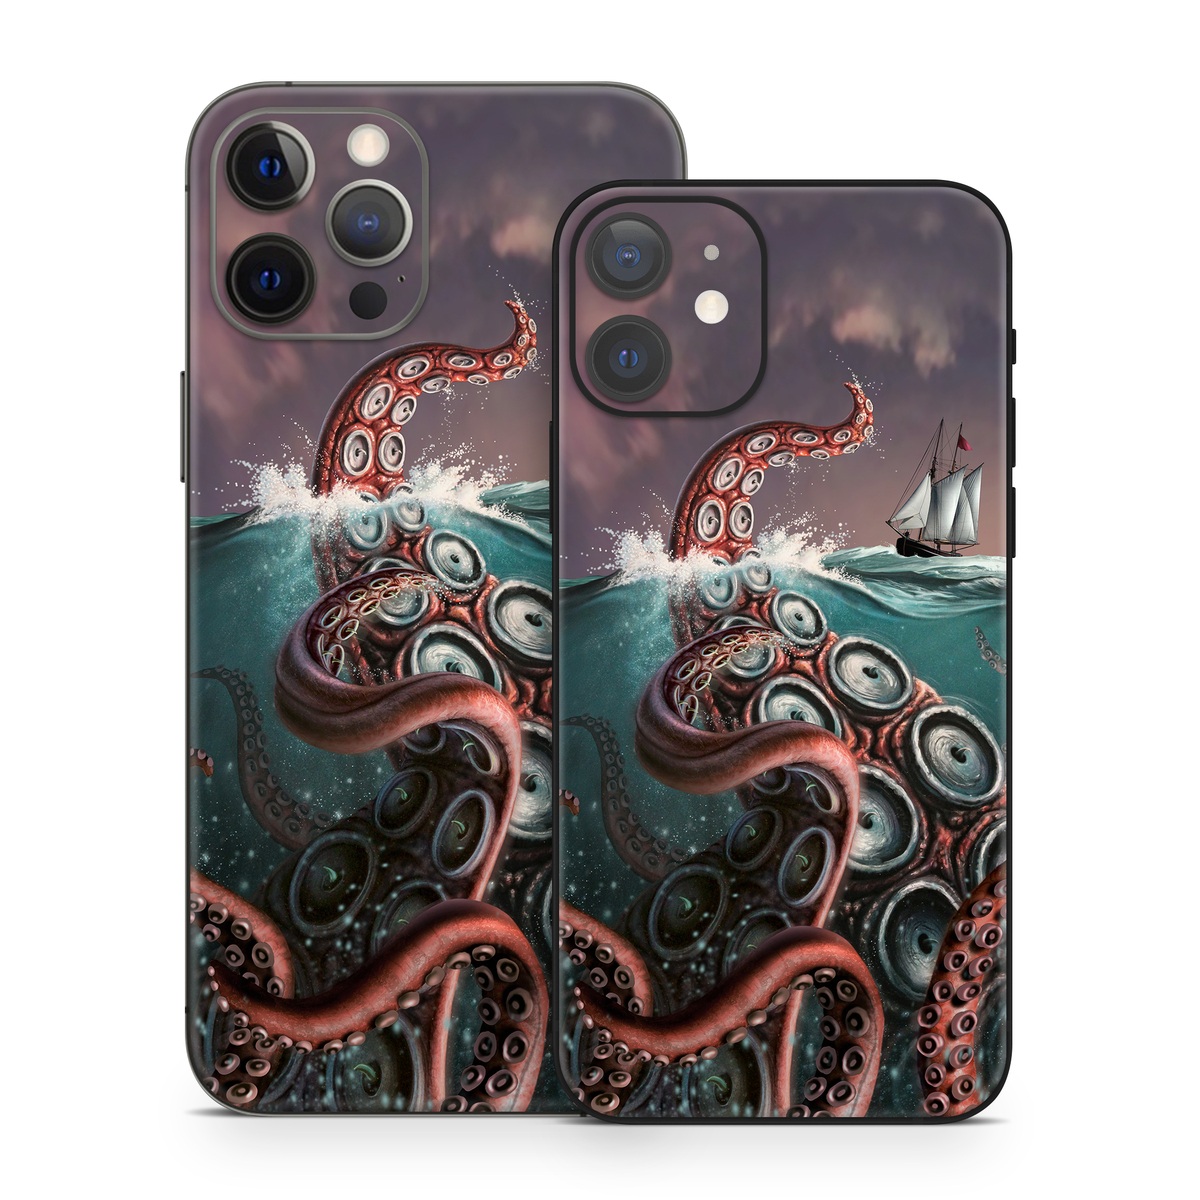 iPhone 12 Skin design of Octopus, Water, Illustration, Wind wave, Sky, Graphic design, Organism, Cephalopod, Cg artwork, giant pacific octopus, with blue, gray, white, brown, red colors